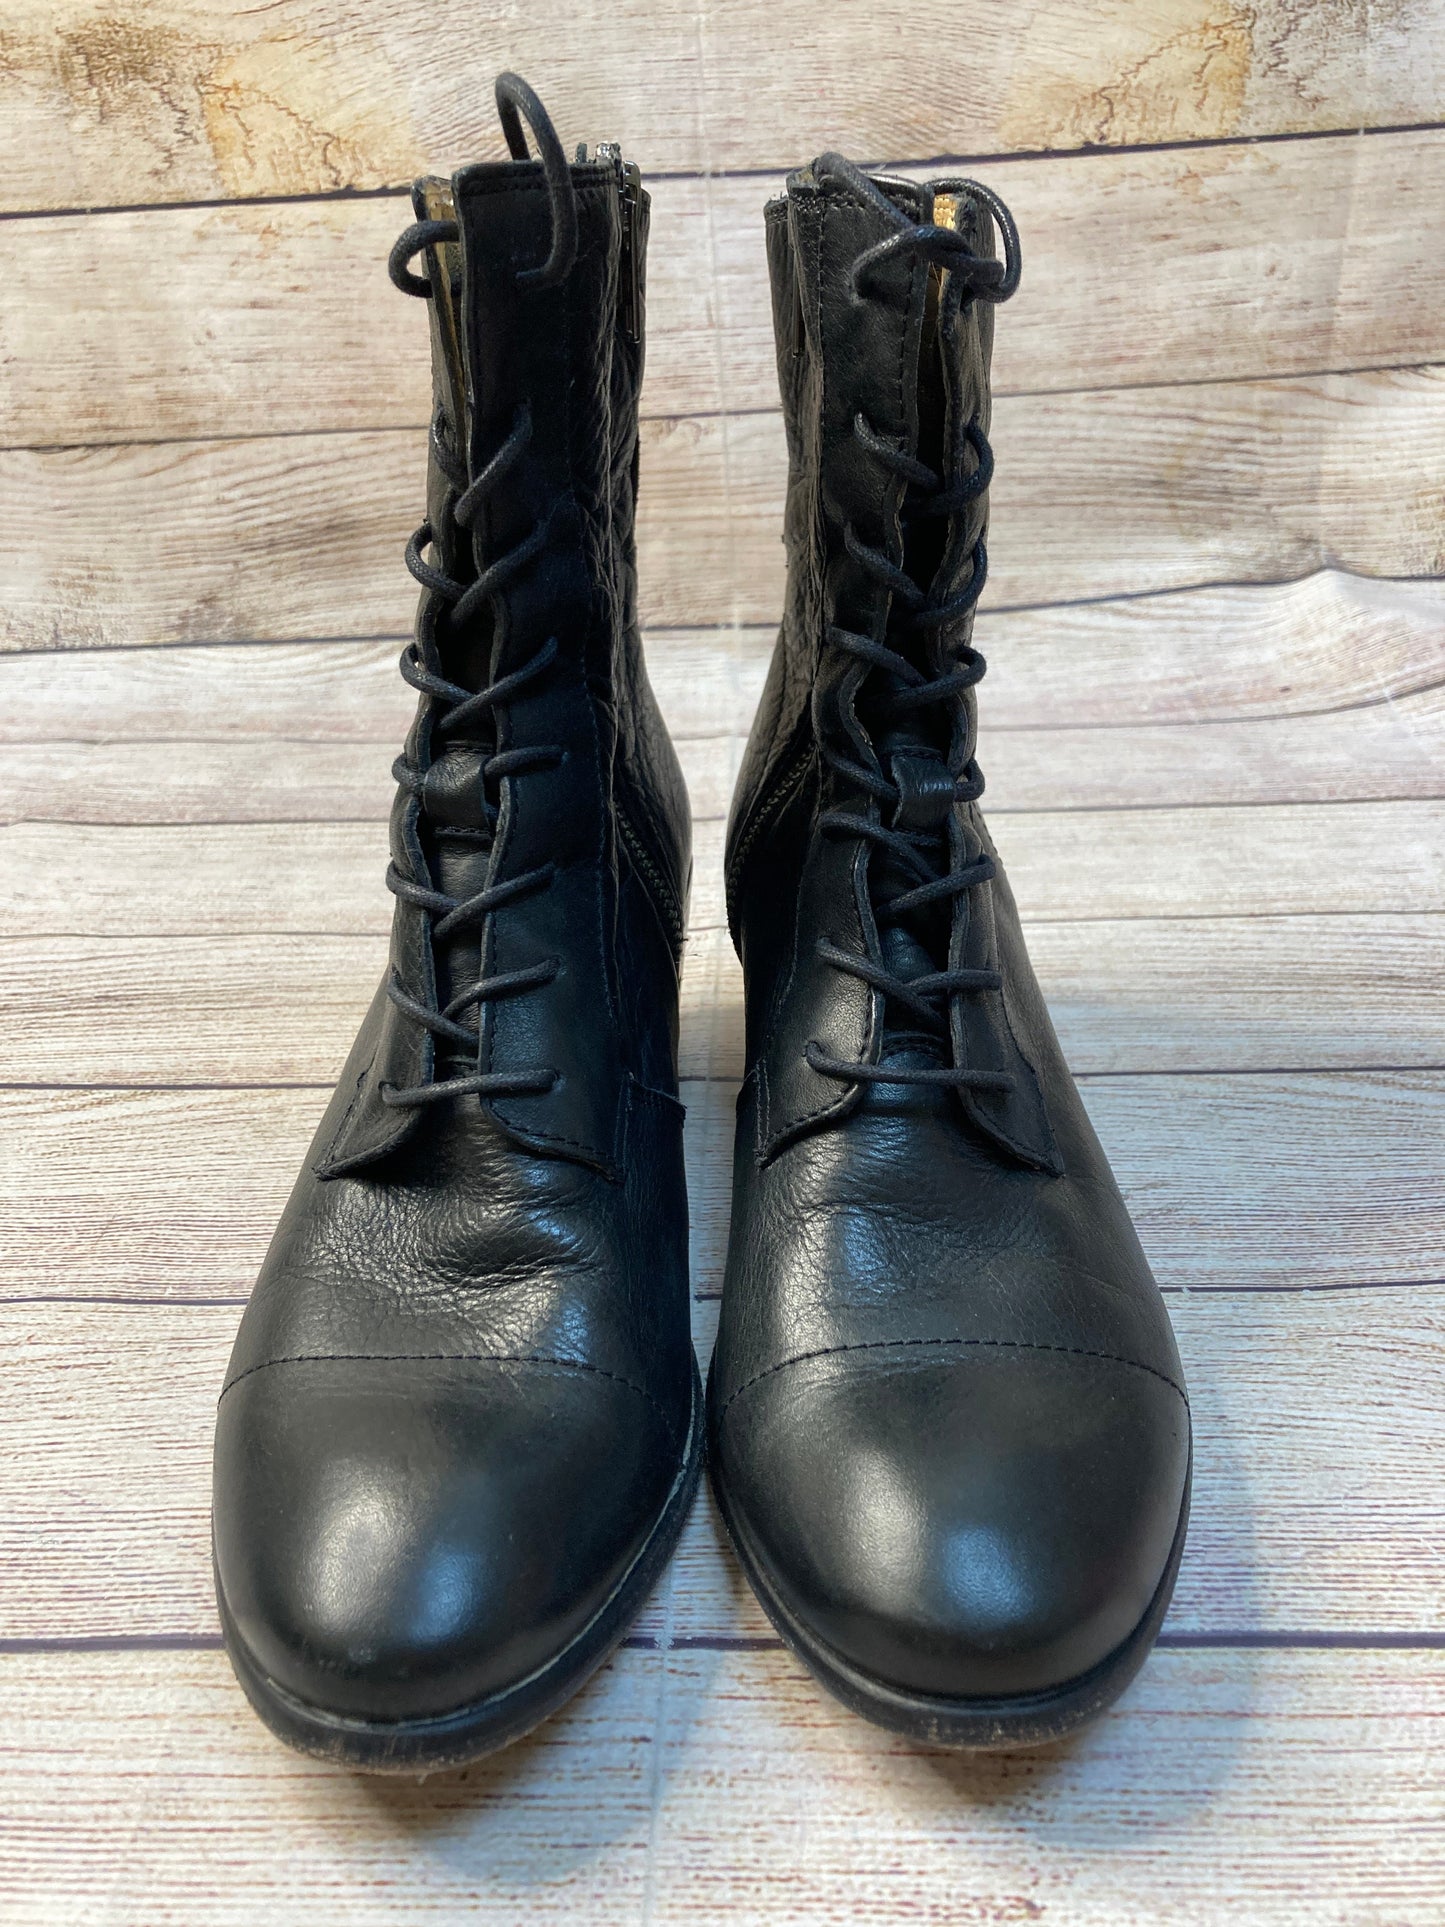 Boots Designer By Frye  Size: 8